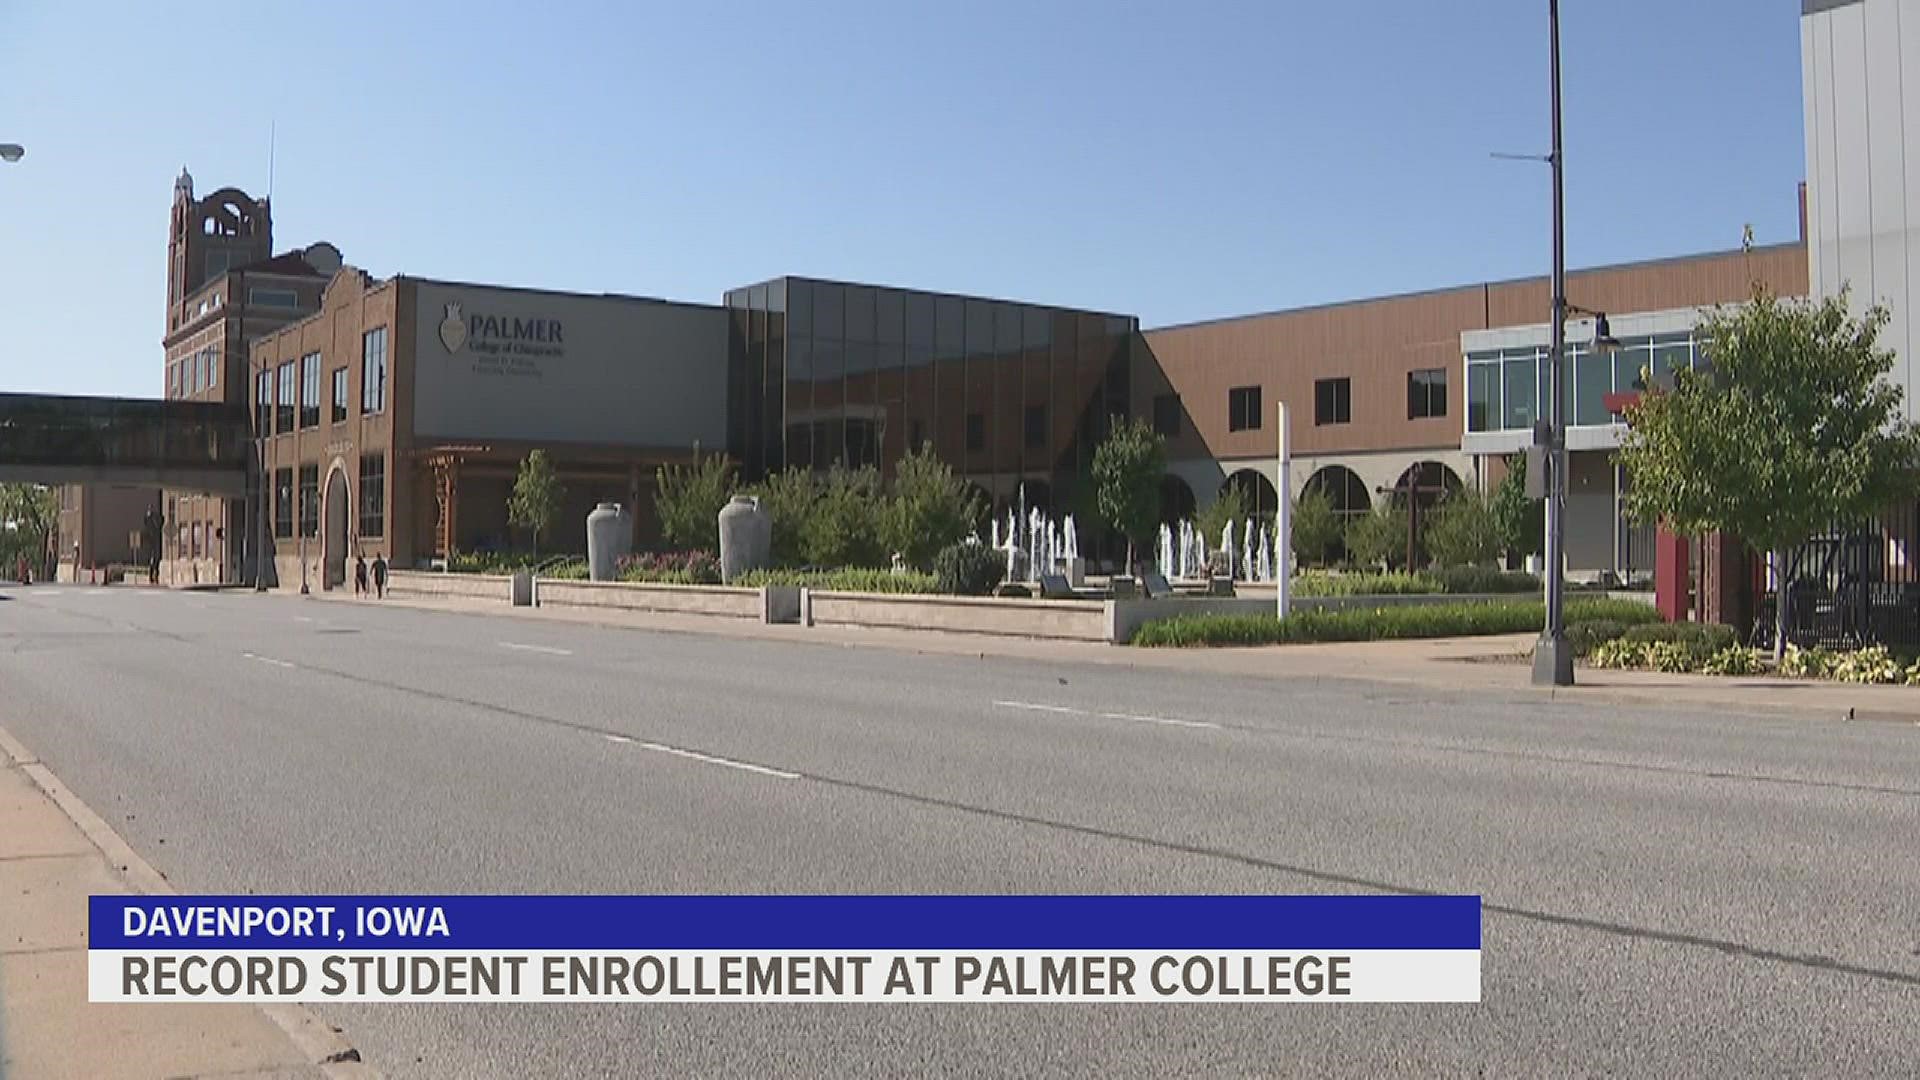 More than 2,100 students are currently enrolled at Palmer's three locations across the country, with Davenport's campus seeing its highest turnout in years.